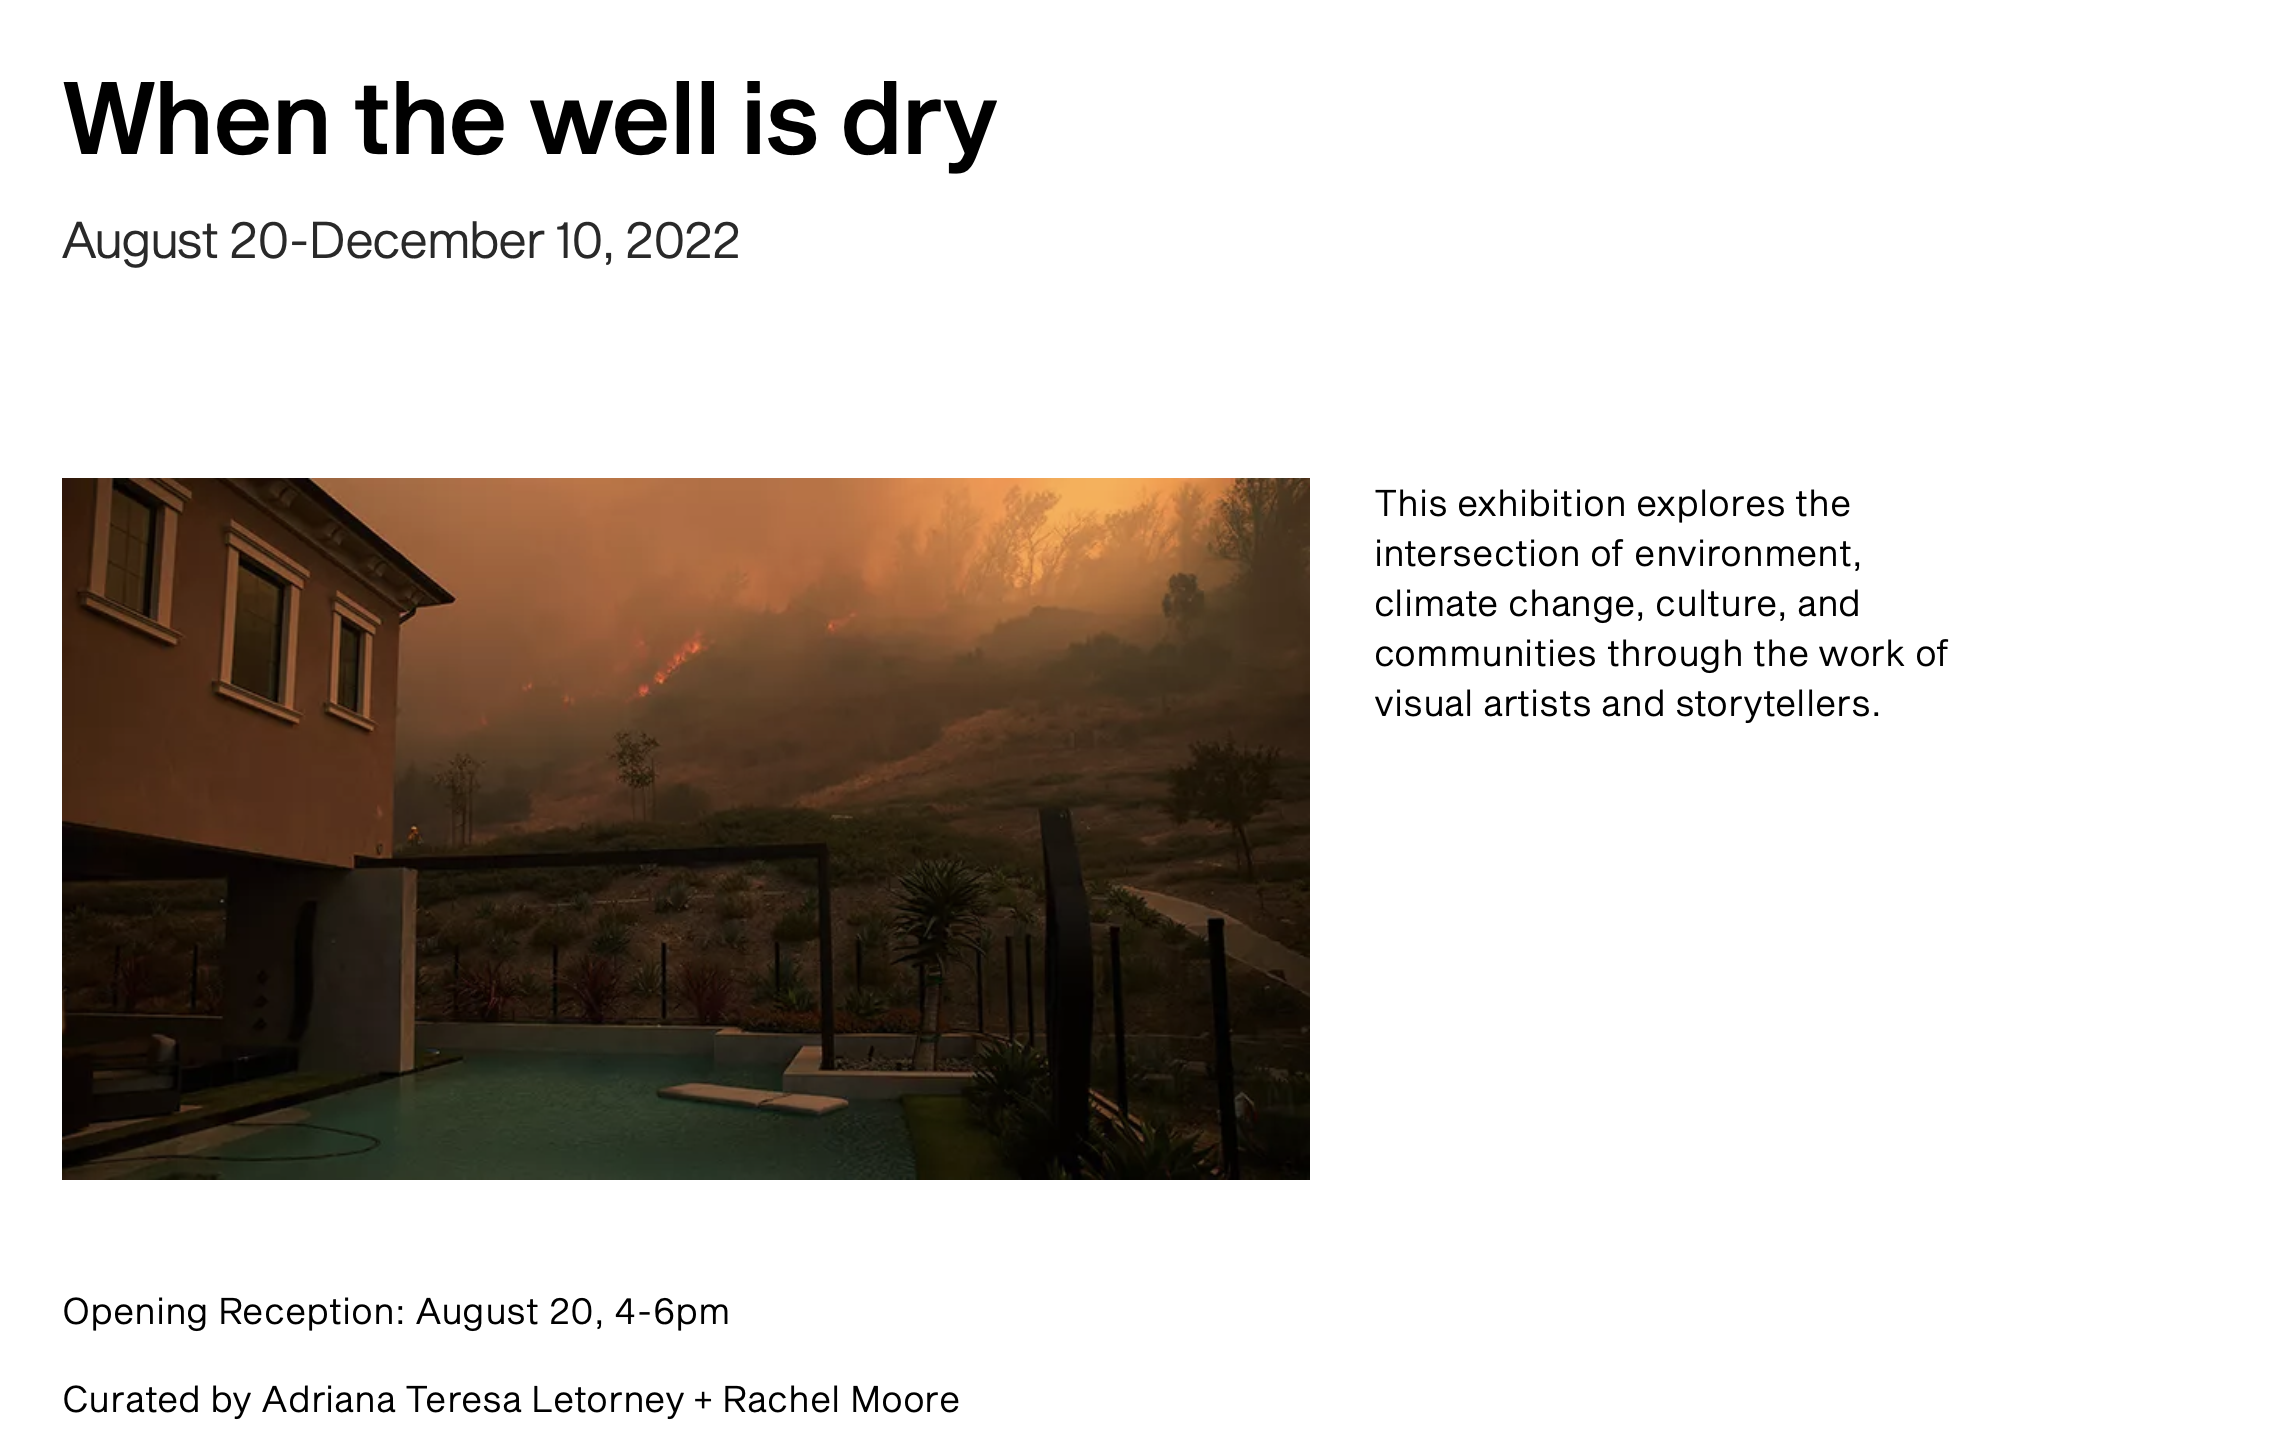 When the well is dry exhibition at The Current